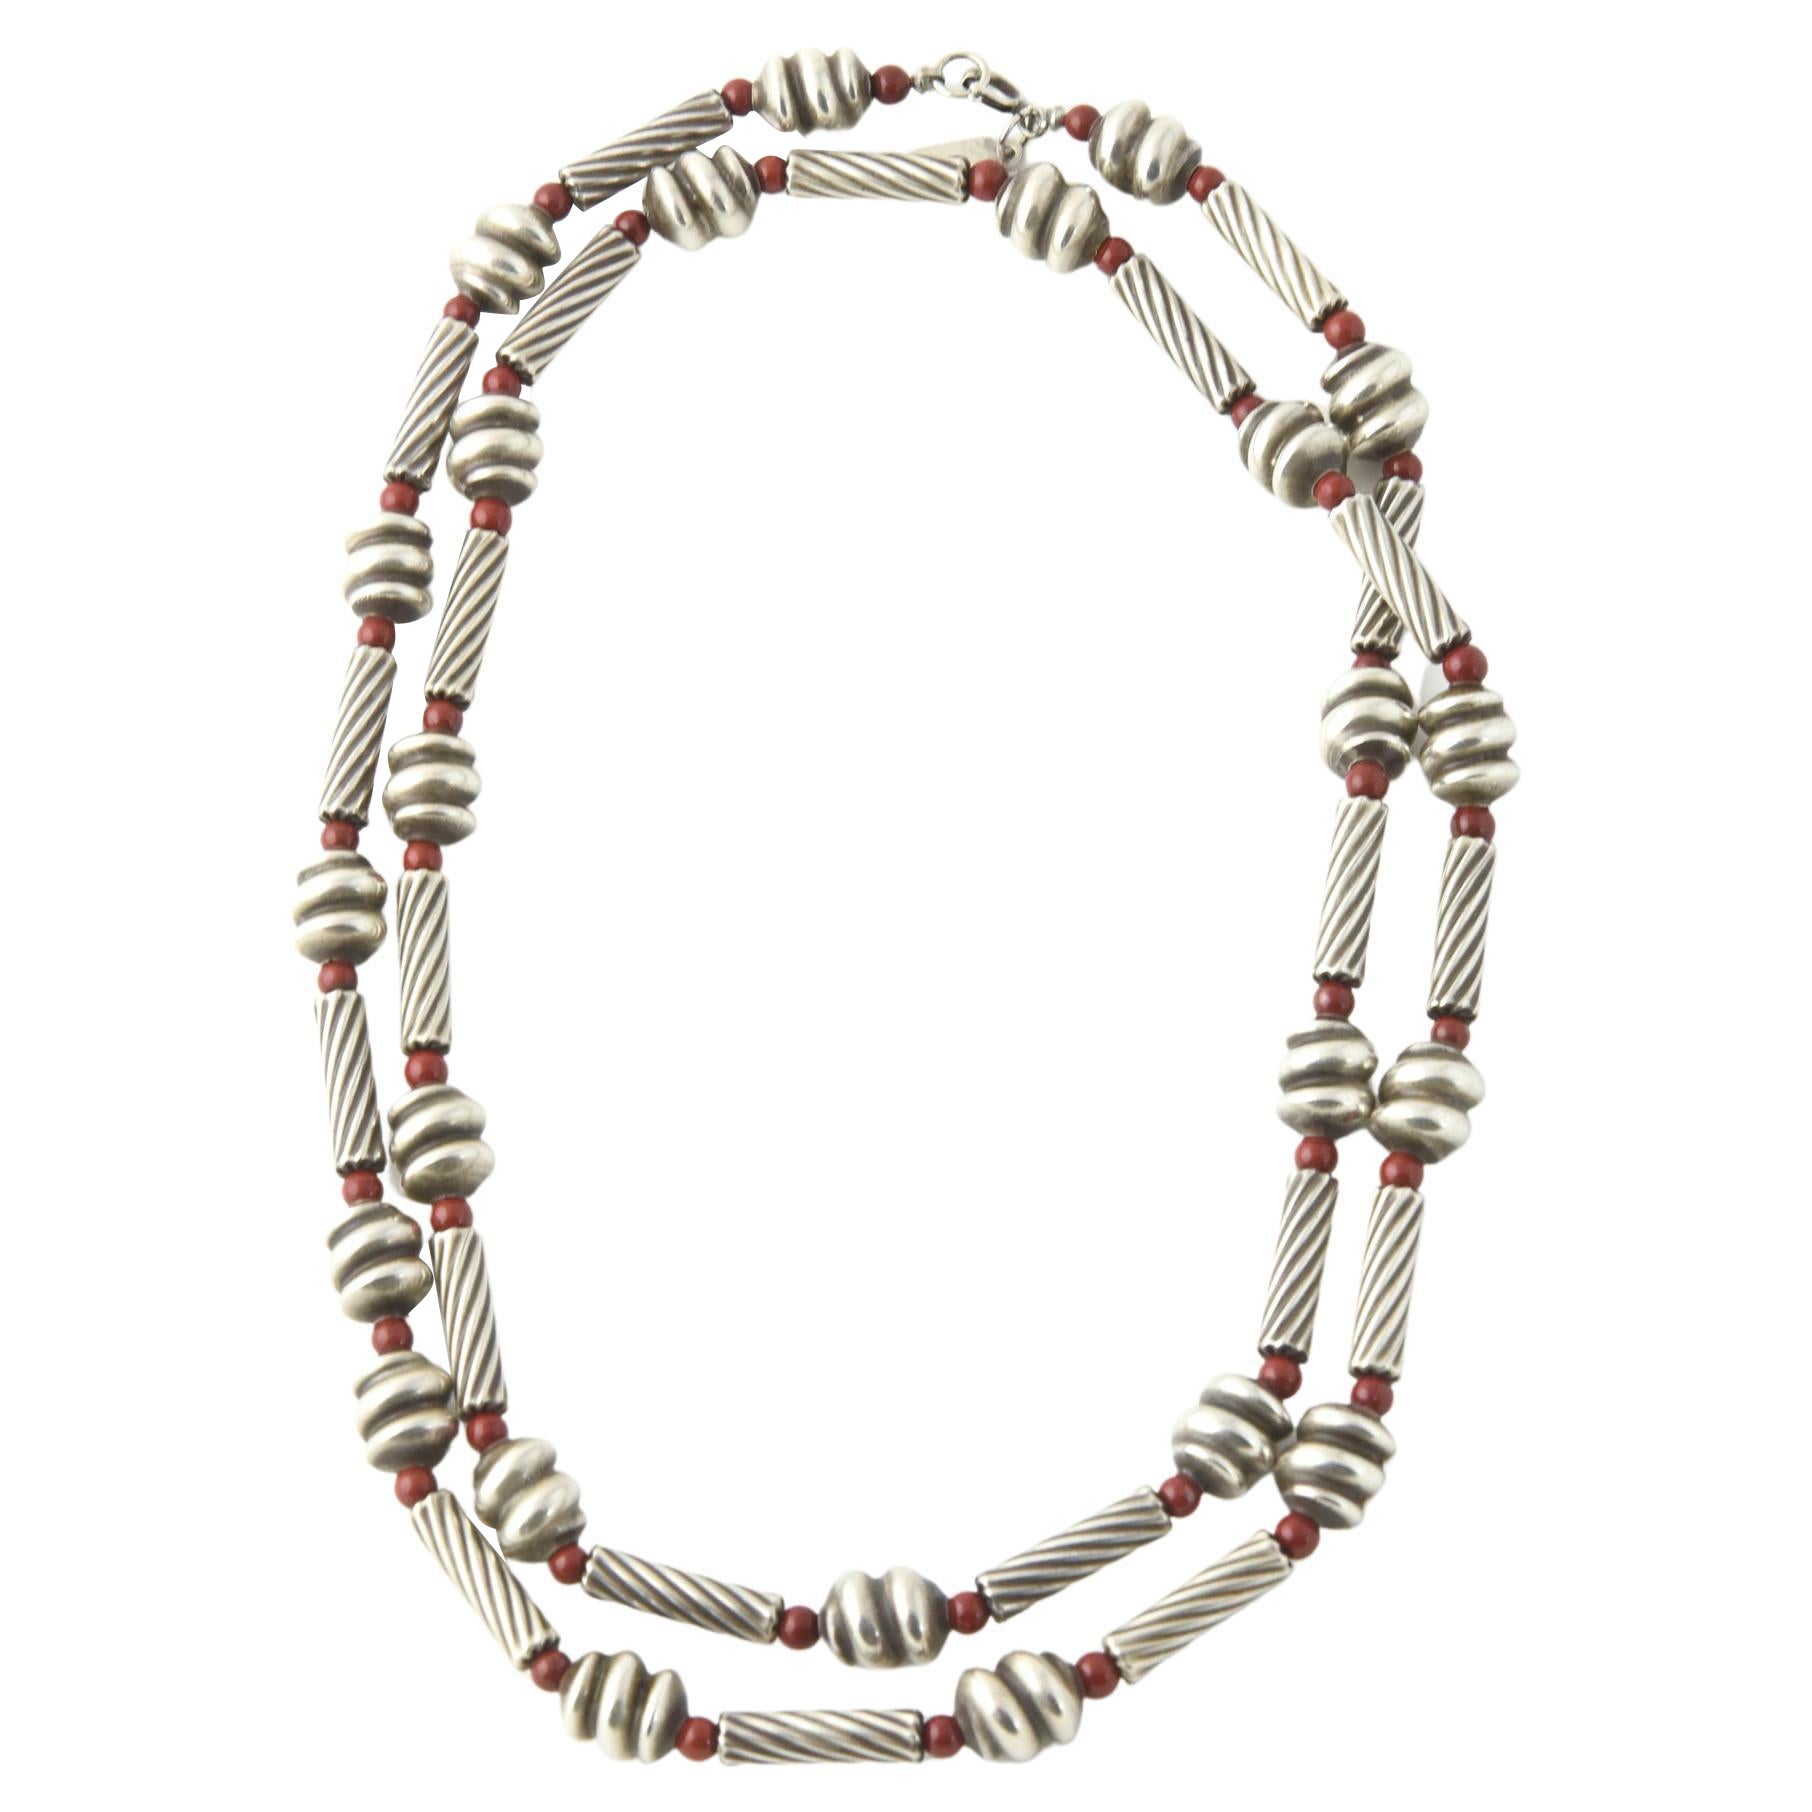 Stylized Sterling Silver and Jasper Bead Long Necklace by Nancy & Rise